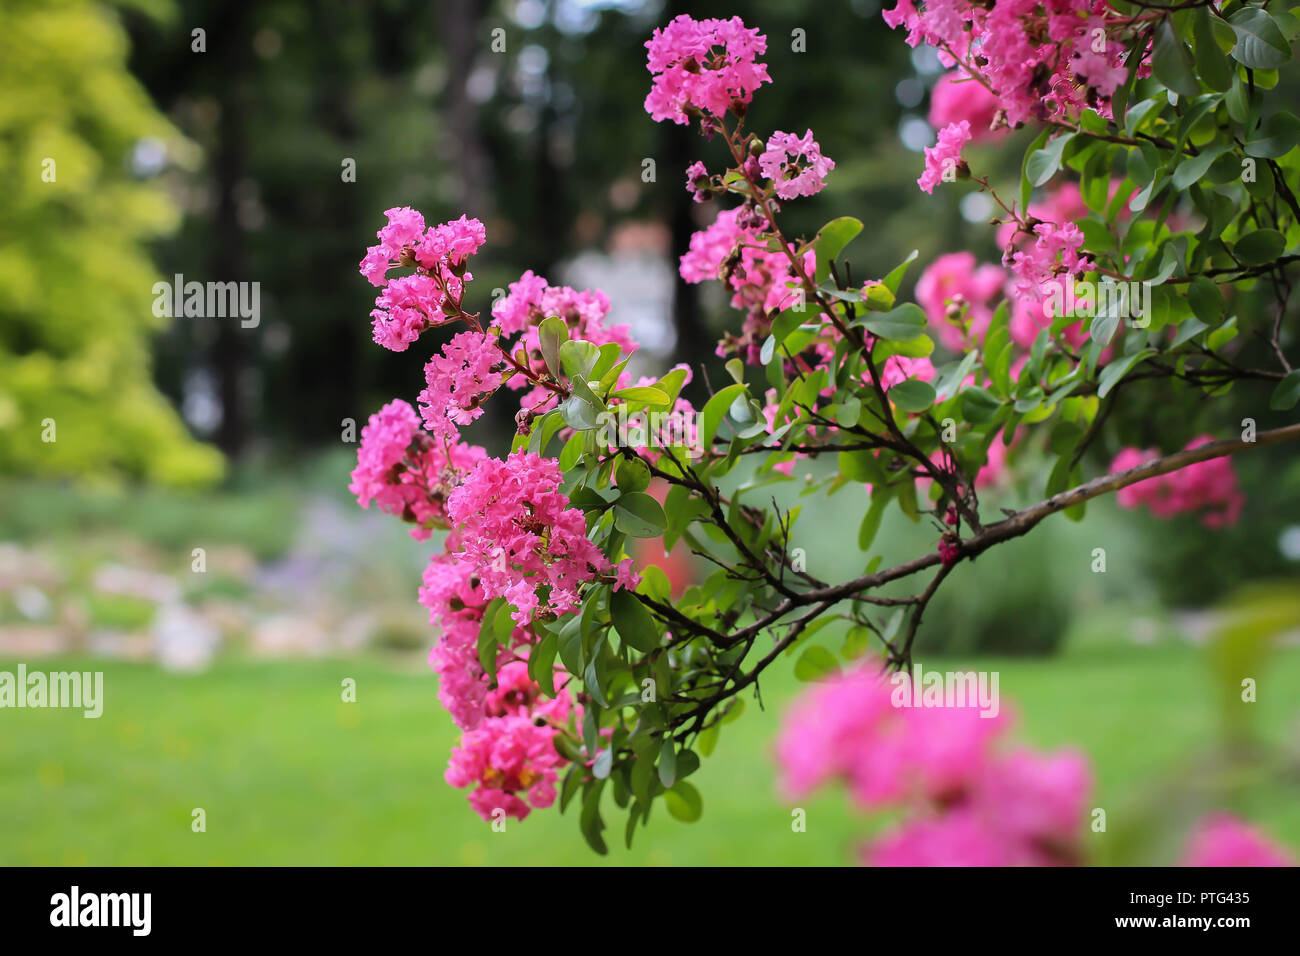 Pink flowers of Lagerstroemia indica / crape myrtle Stock Photo